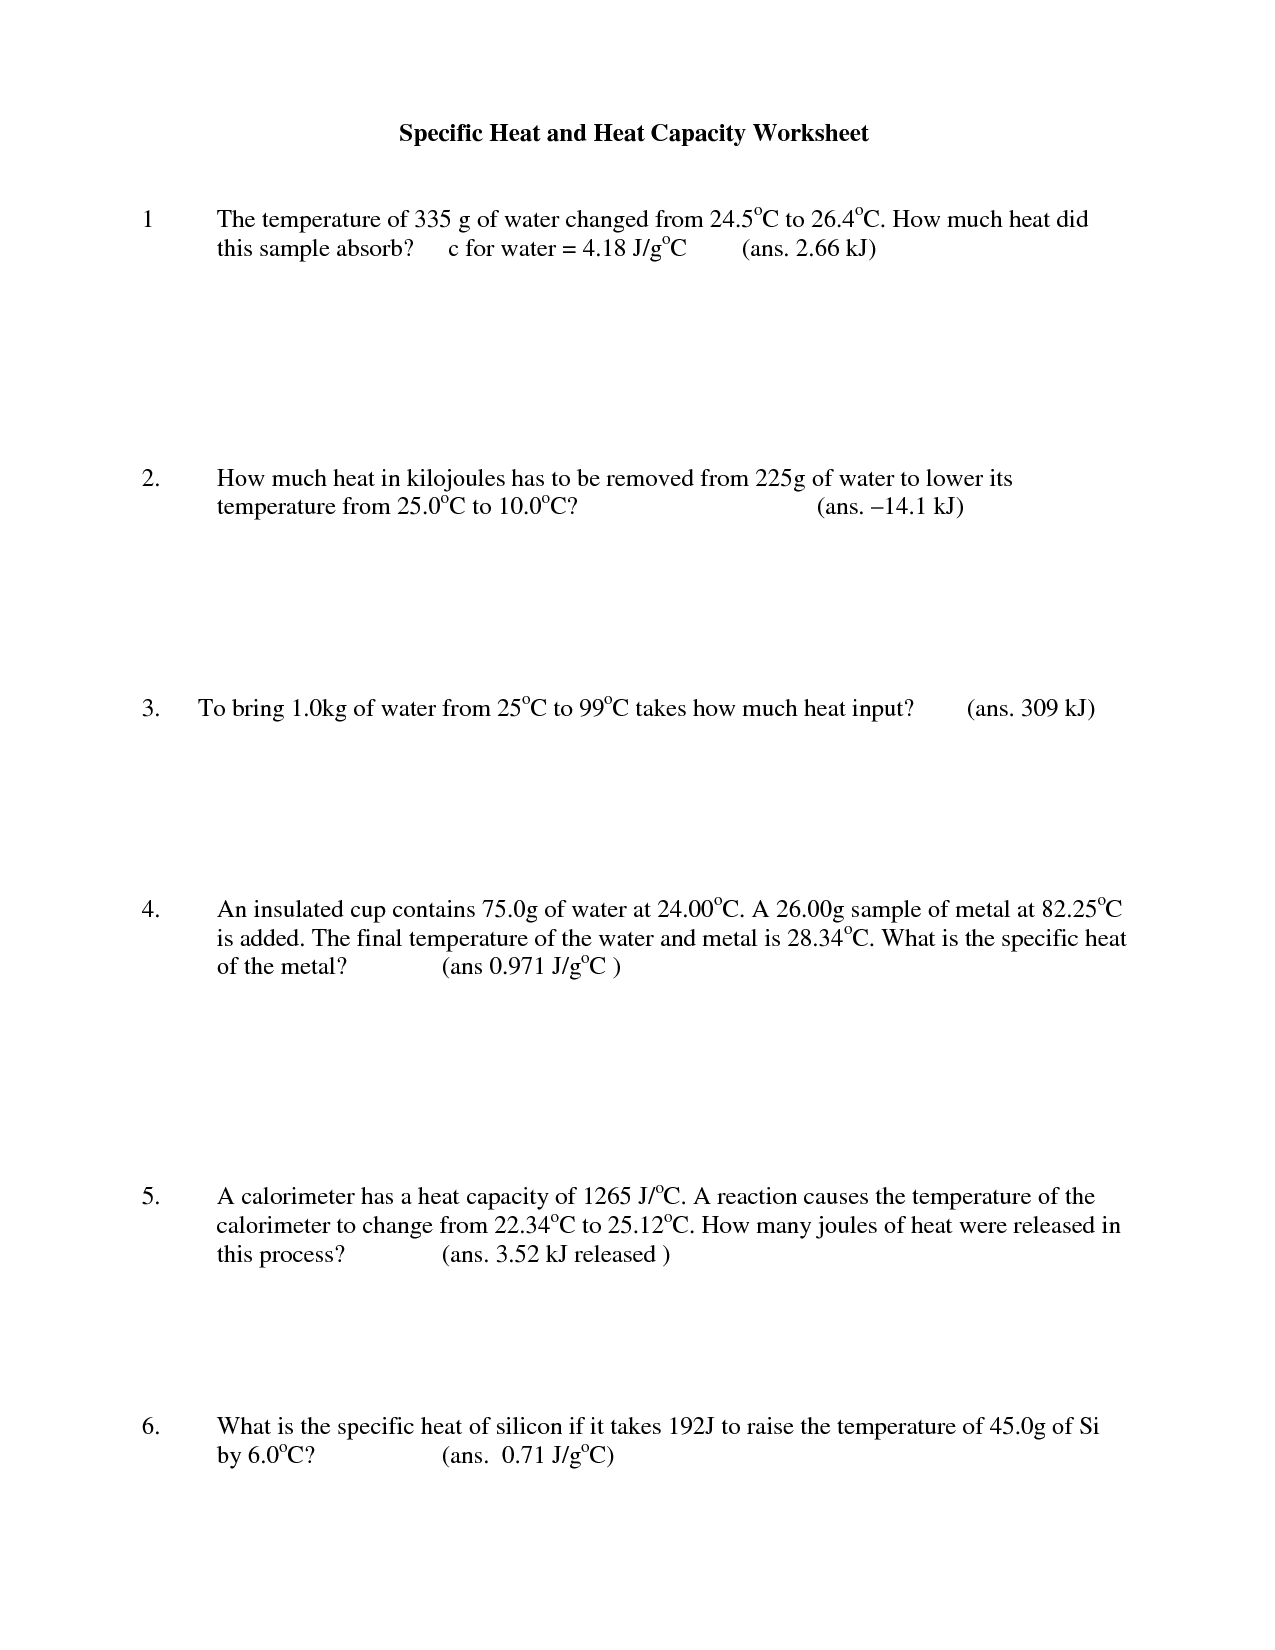 Specific Heat Worksheets and Answers Image